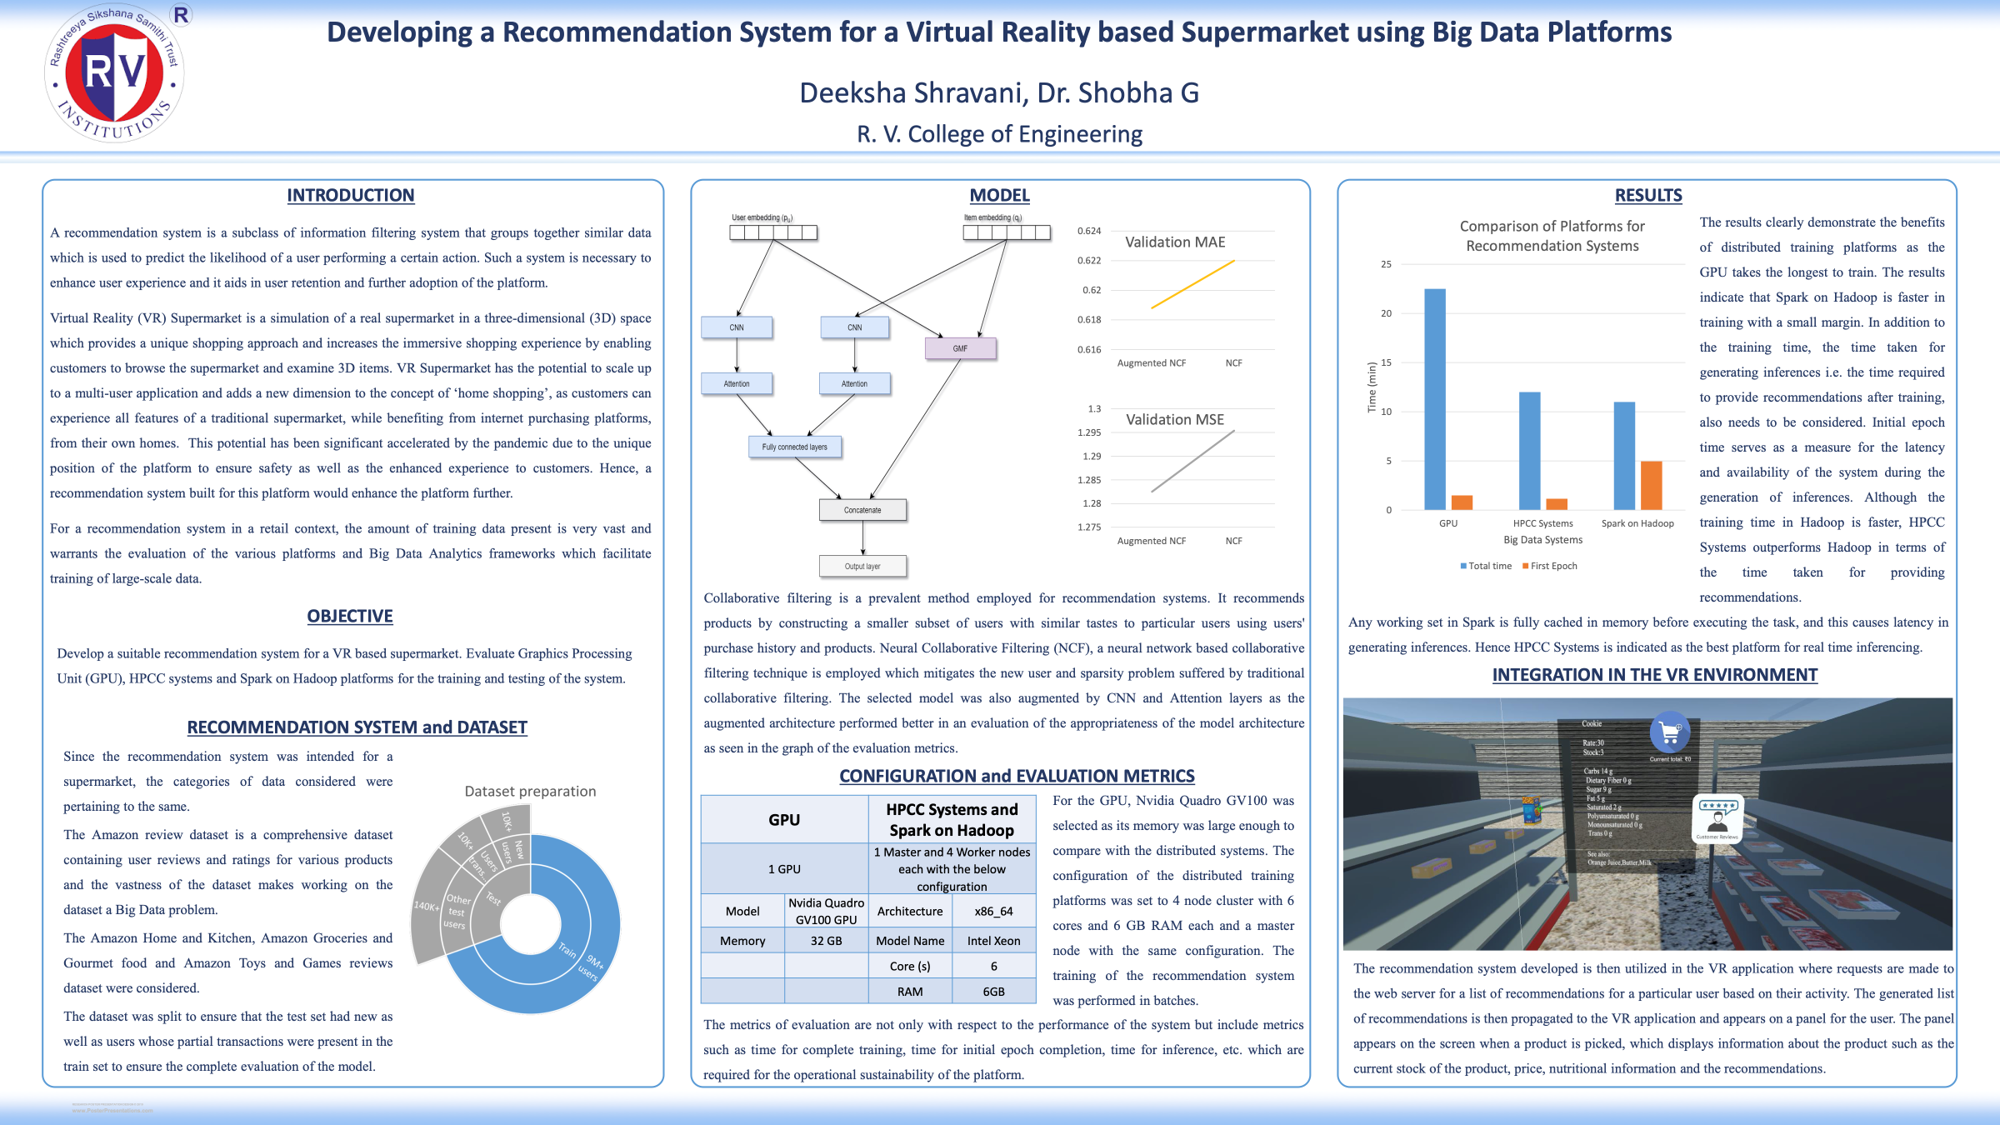 Poster Image- Developing a Recommendation System for a Virtual Reality based Supermarket using Big Data Platforms